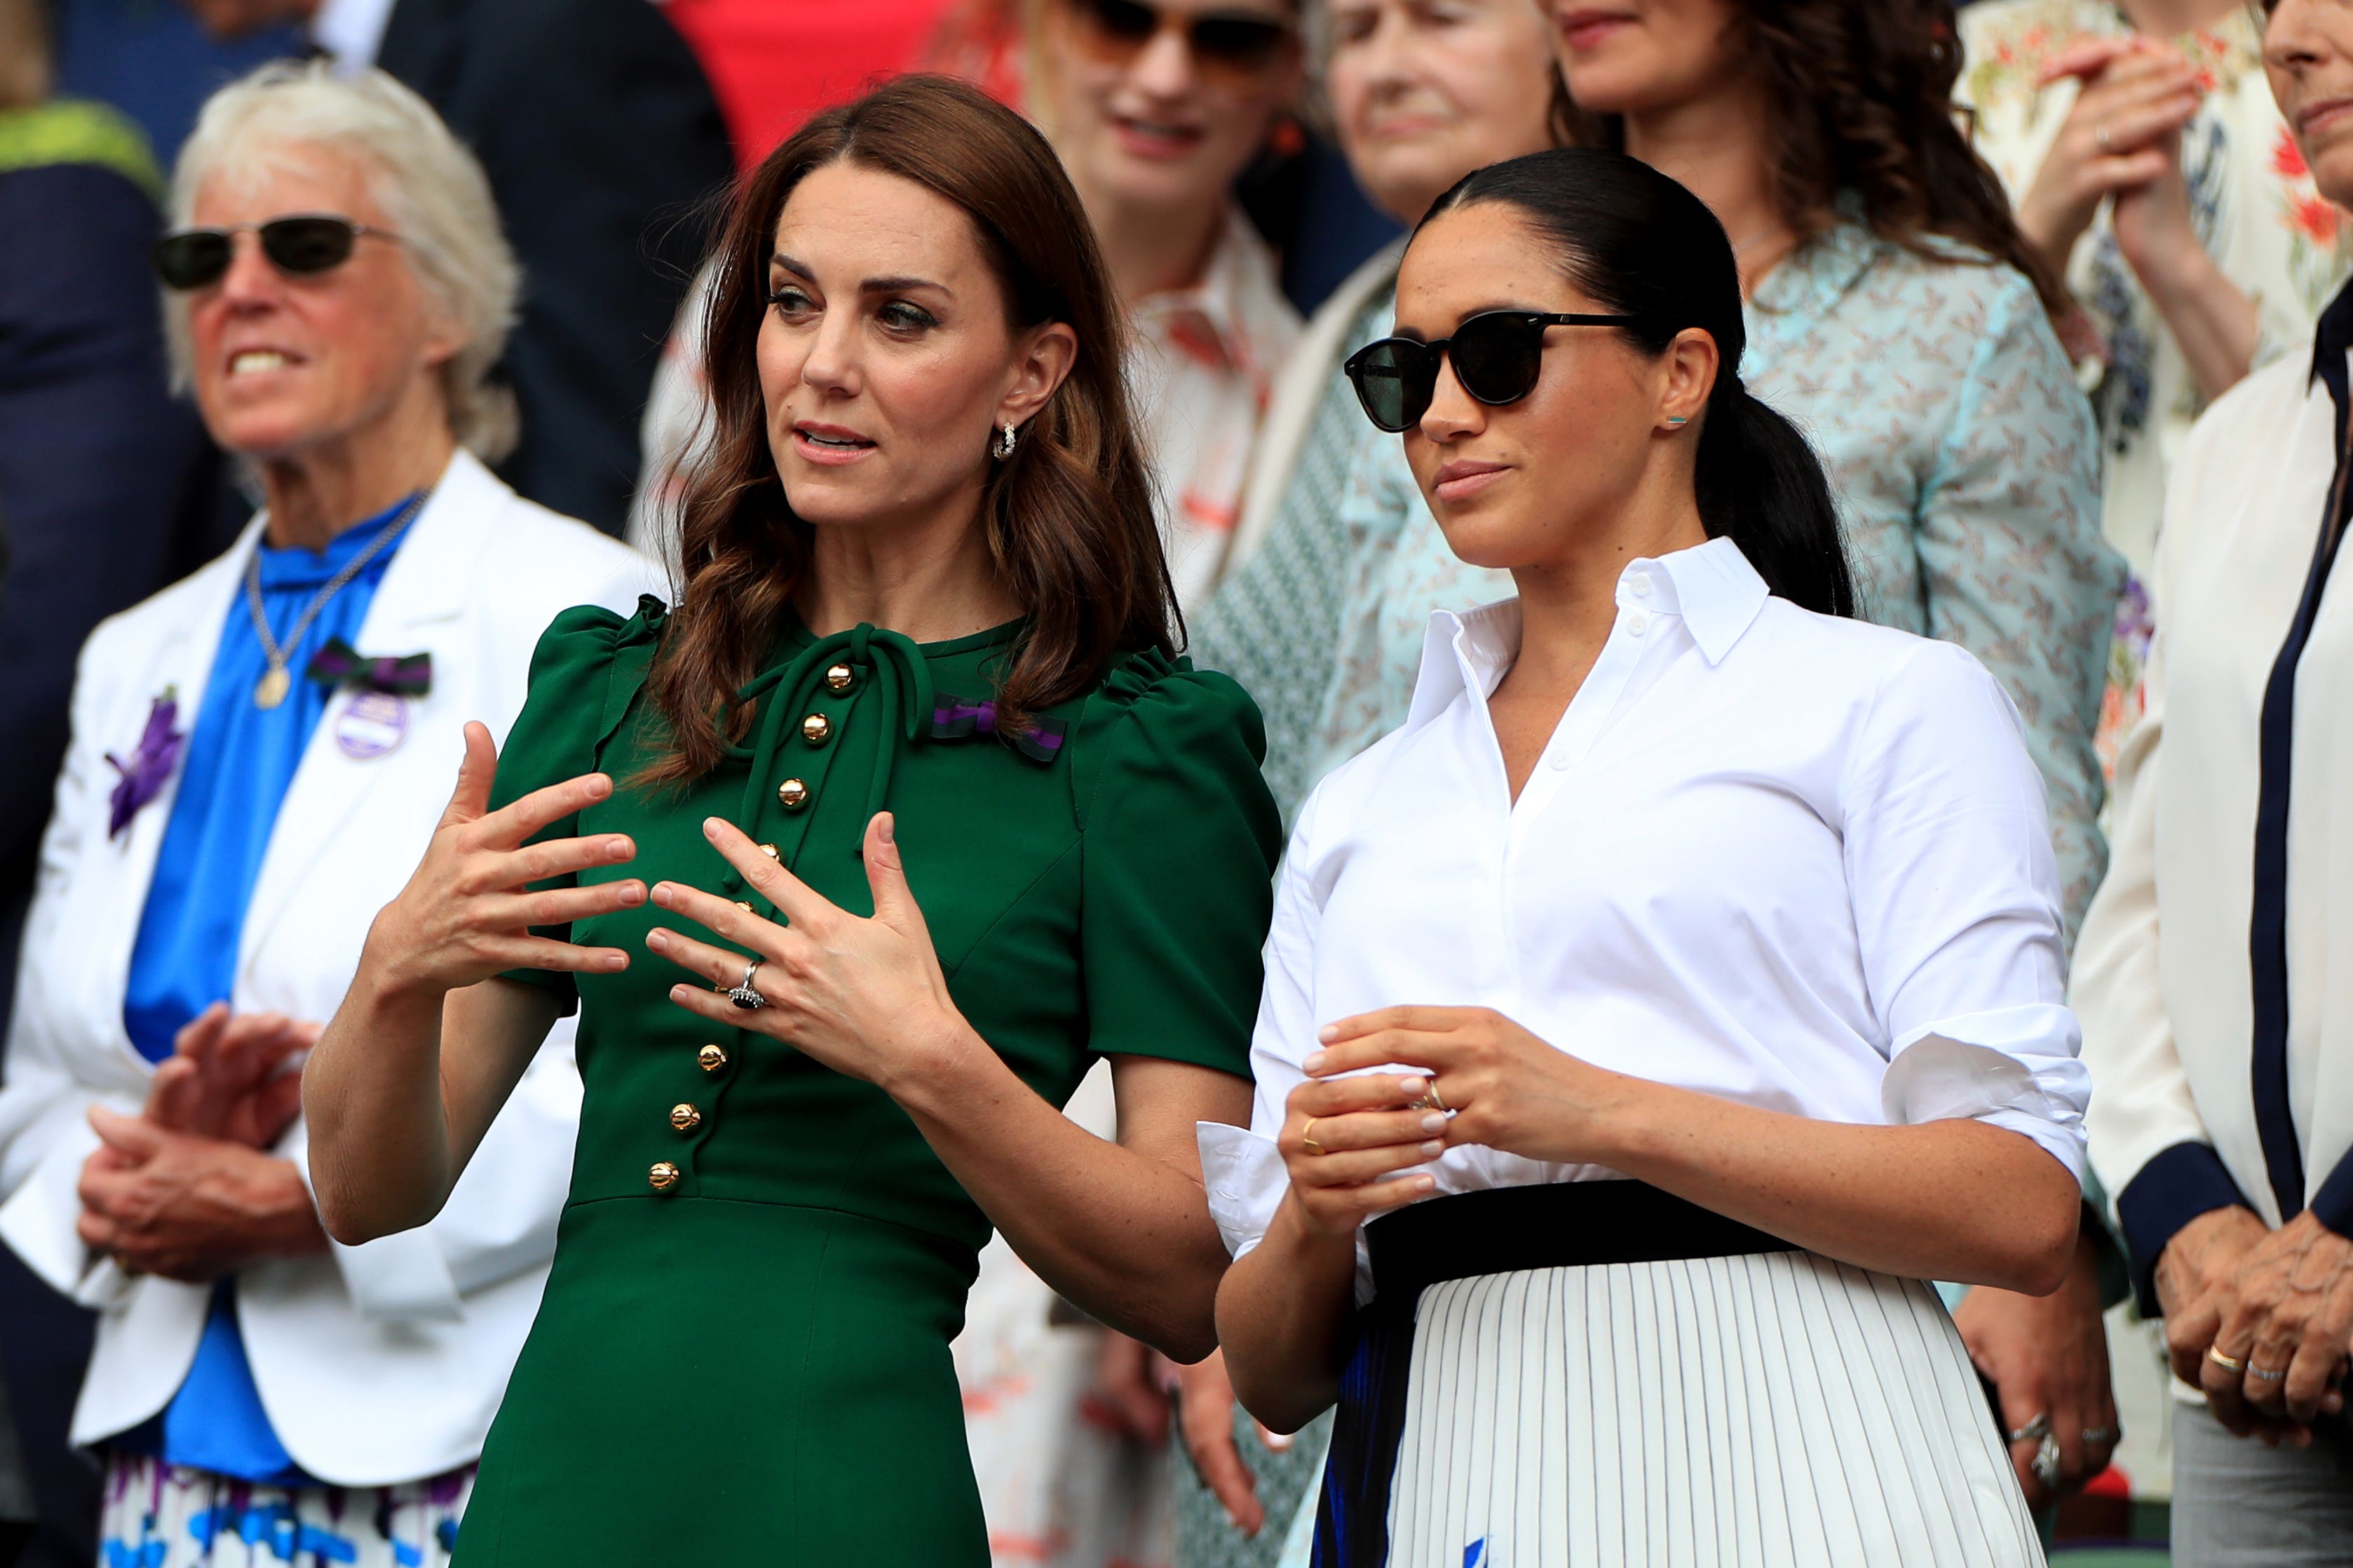 Meghan was regarded more difficult than Kate ‘because she had opinions’